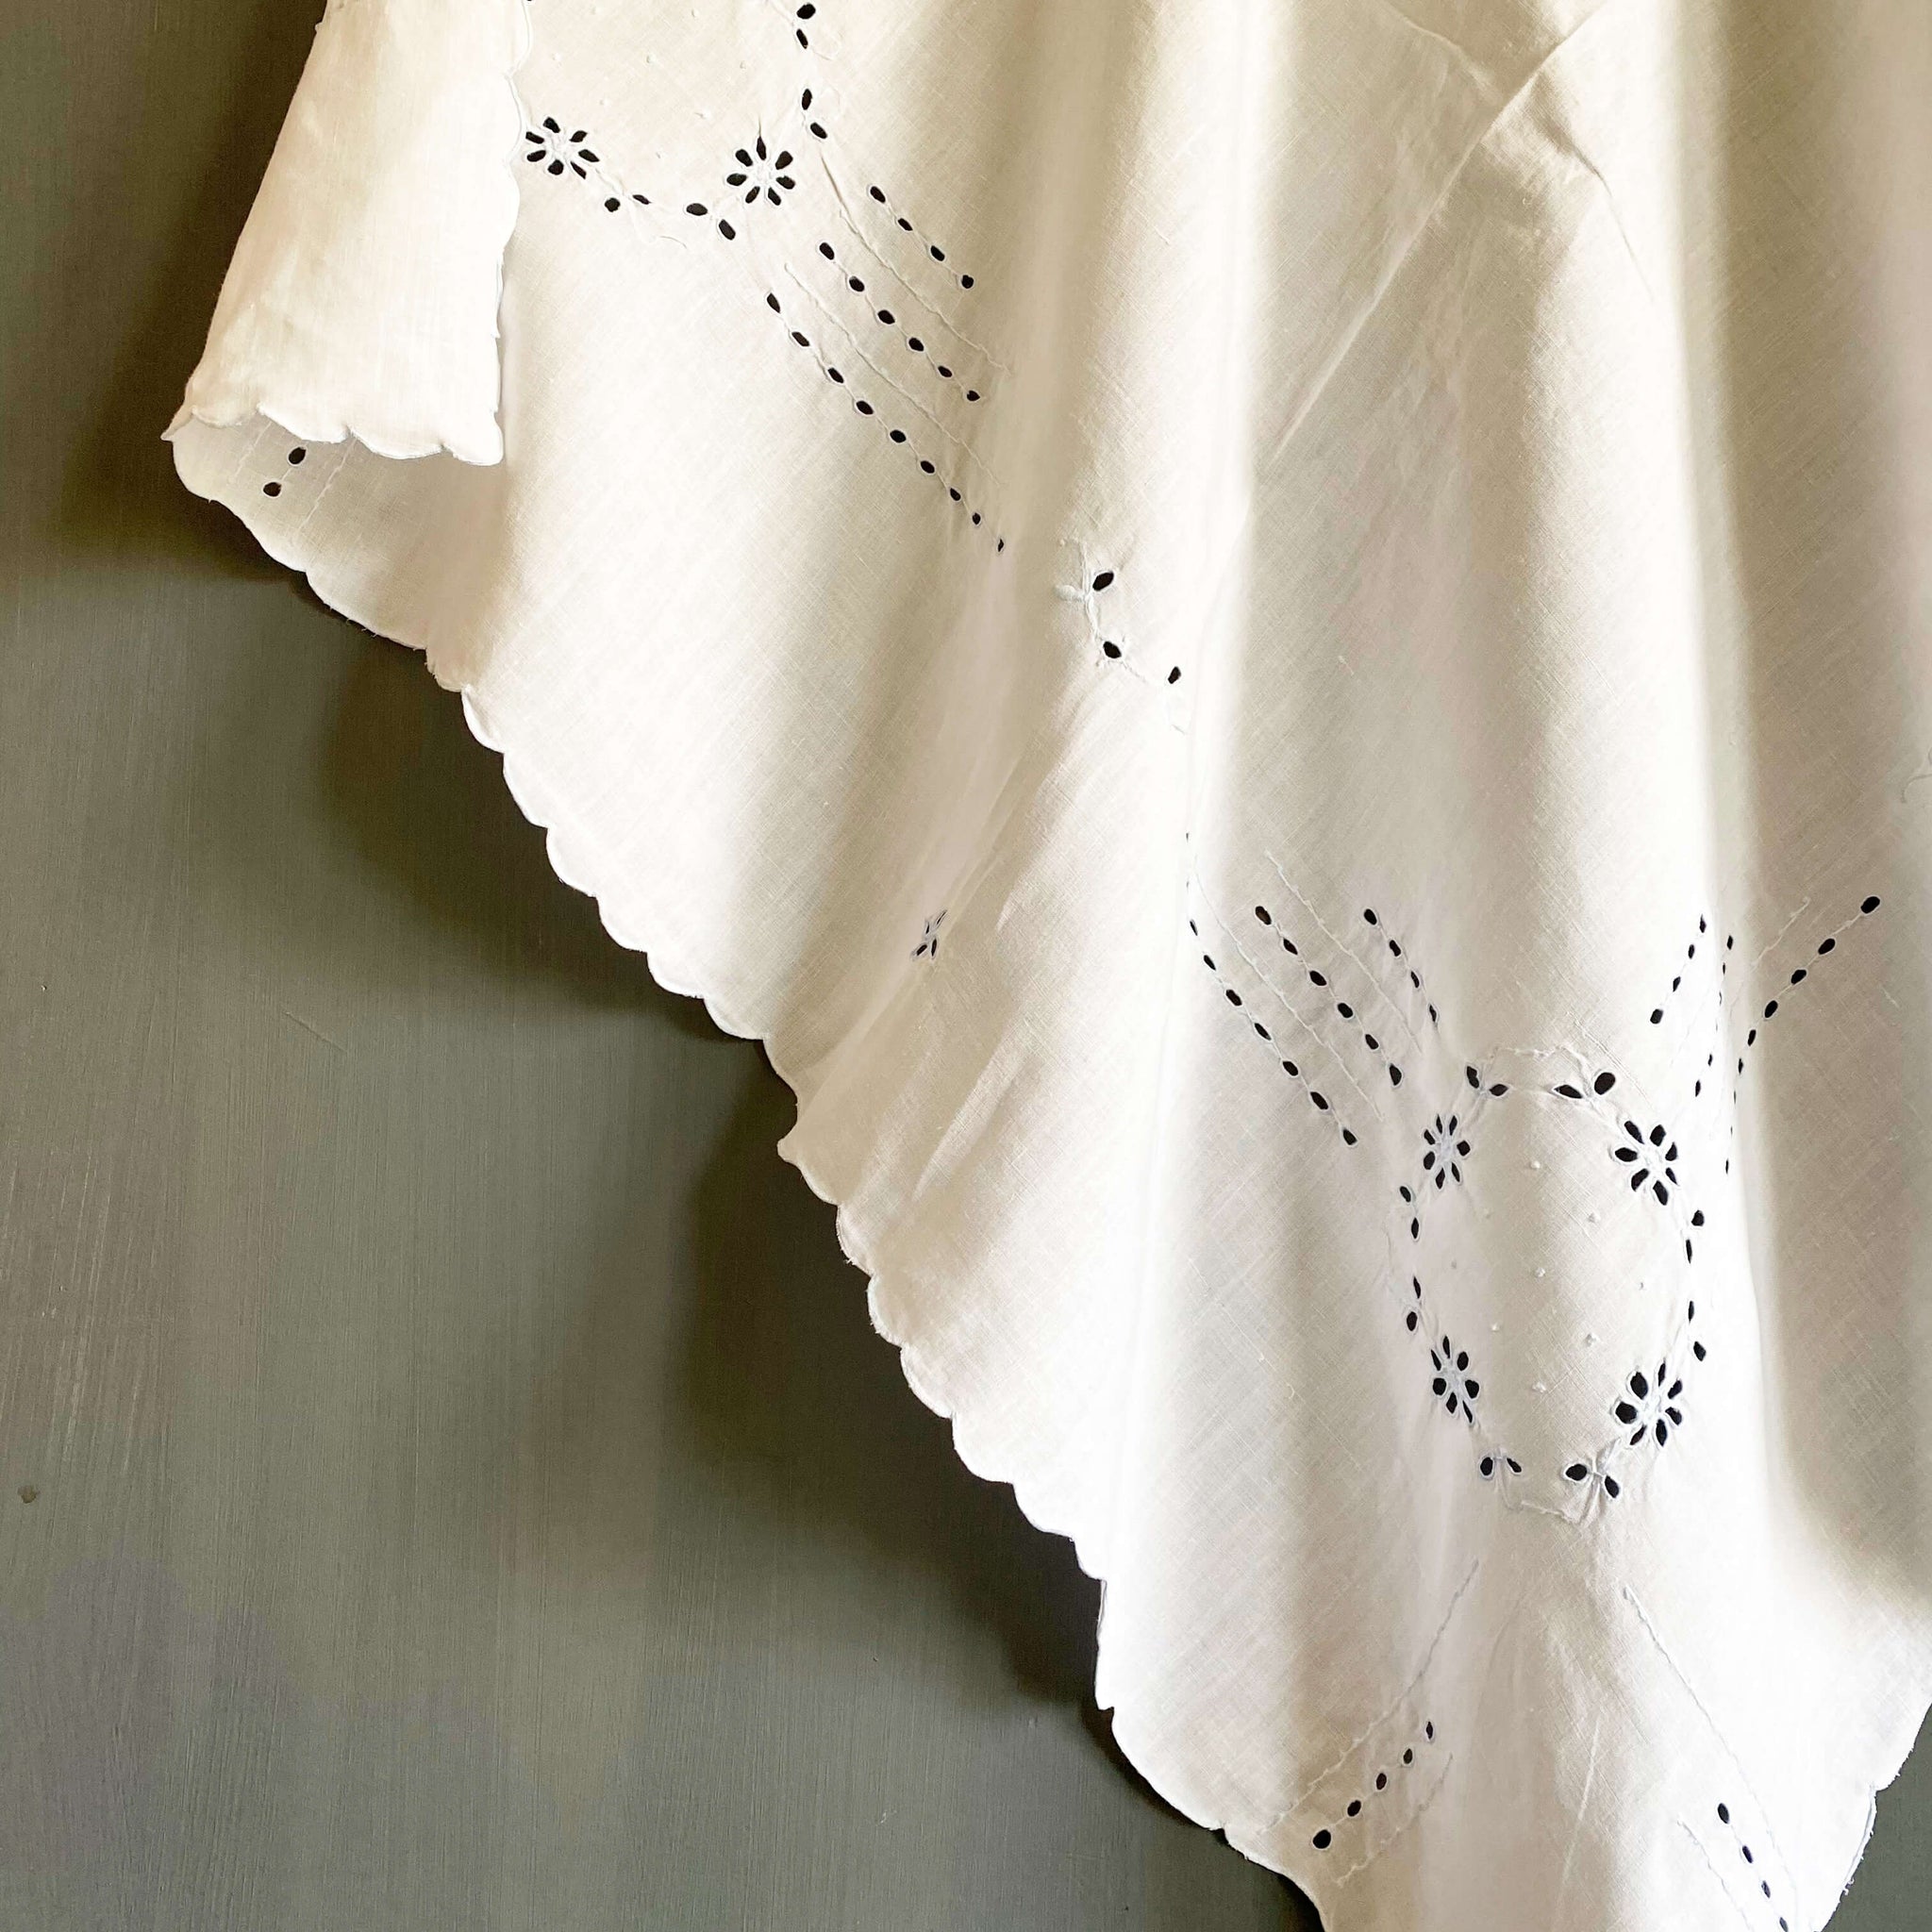 Vintage Embroidered Bridge Tablecloth with Broderie Eyelet Cutwork and French Knot Embroidery